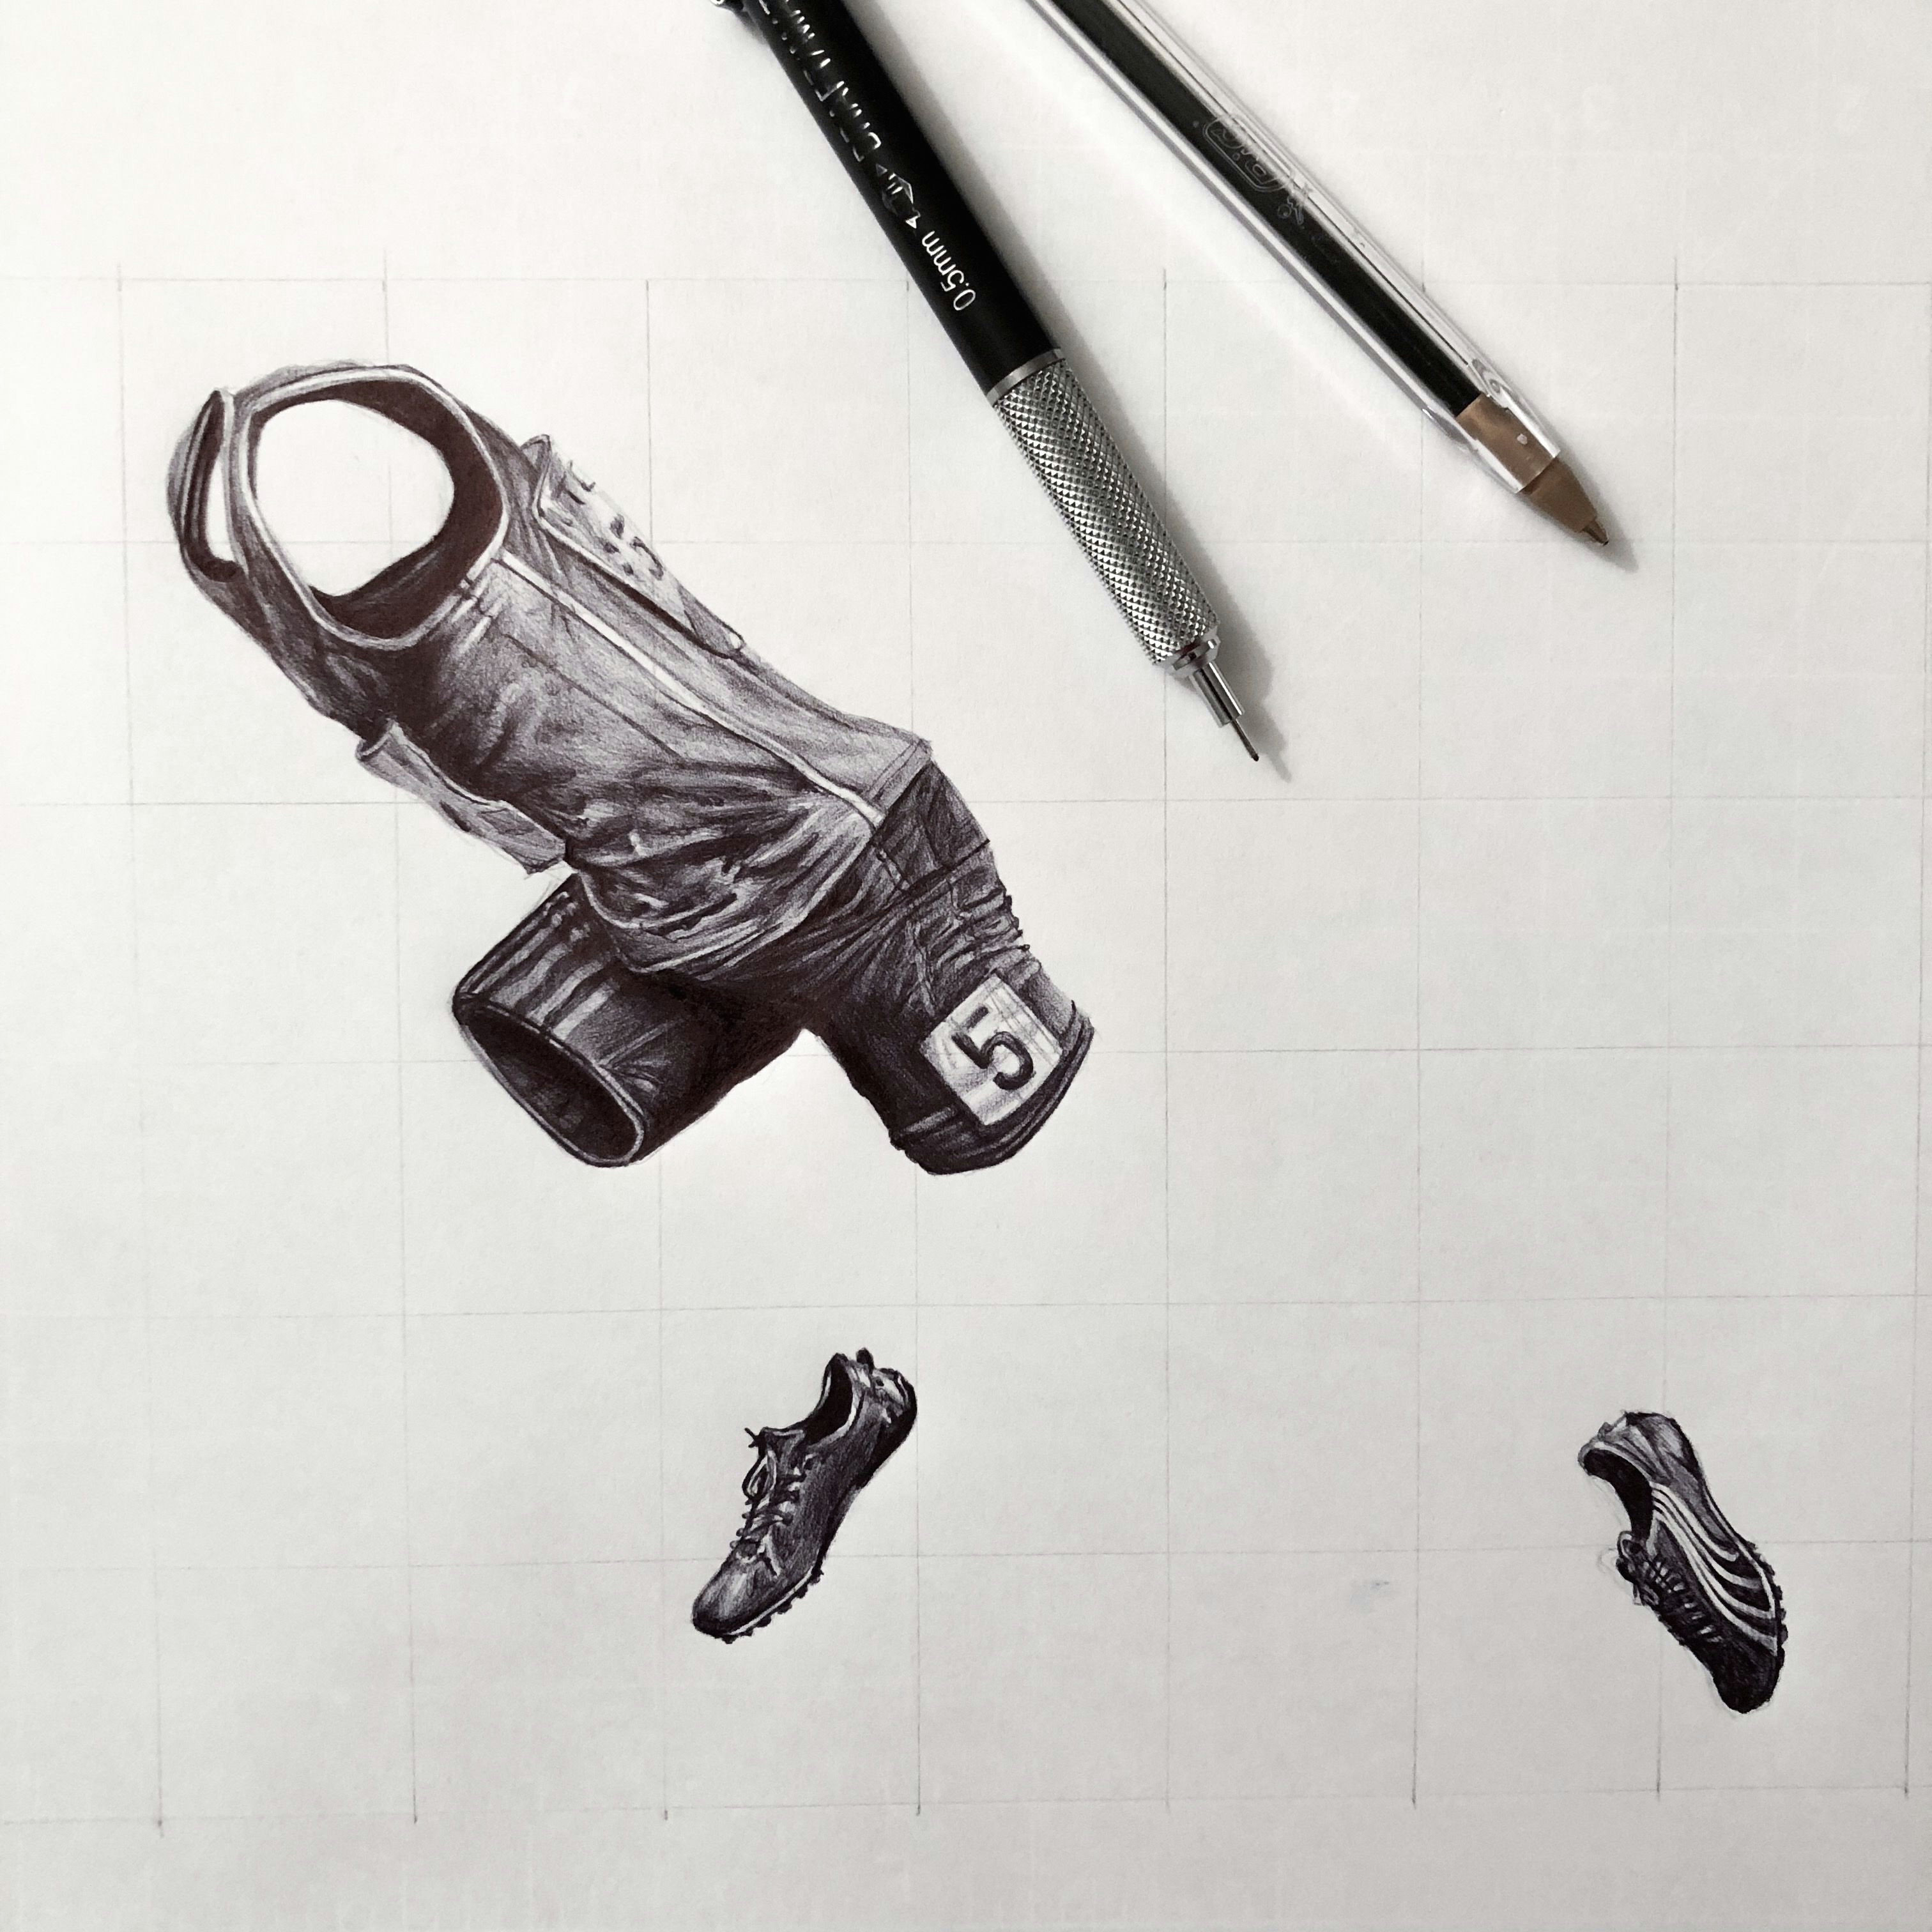 J Bolt Drawing Usain Bolt Track and Field Joey Khamis Design Pen Drawing